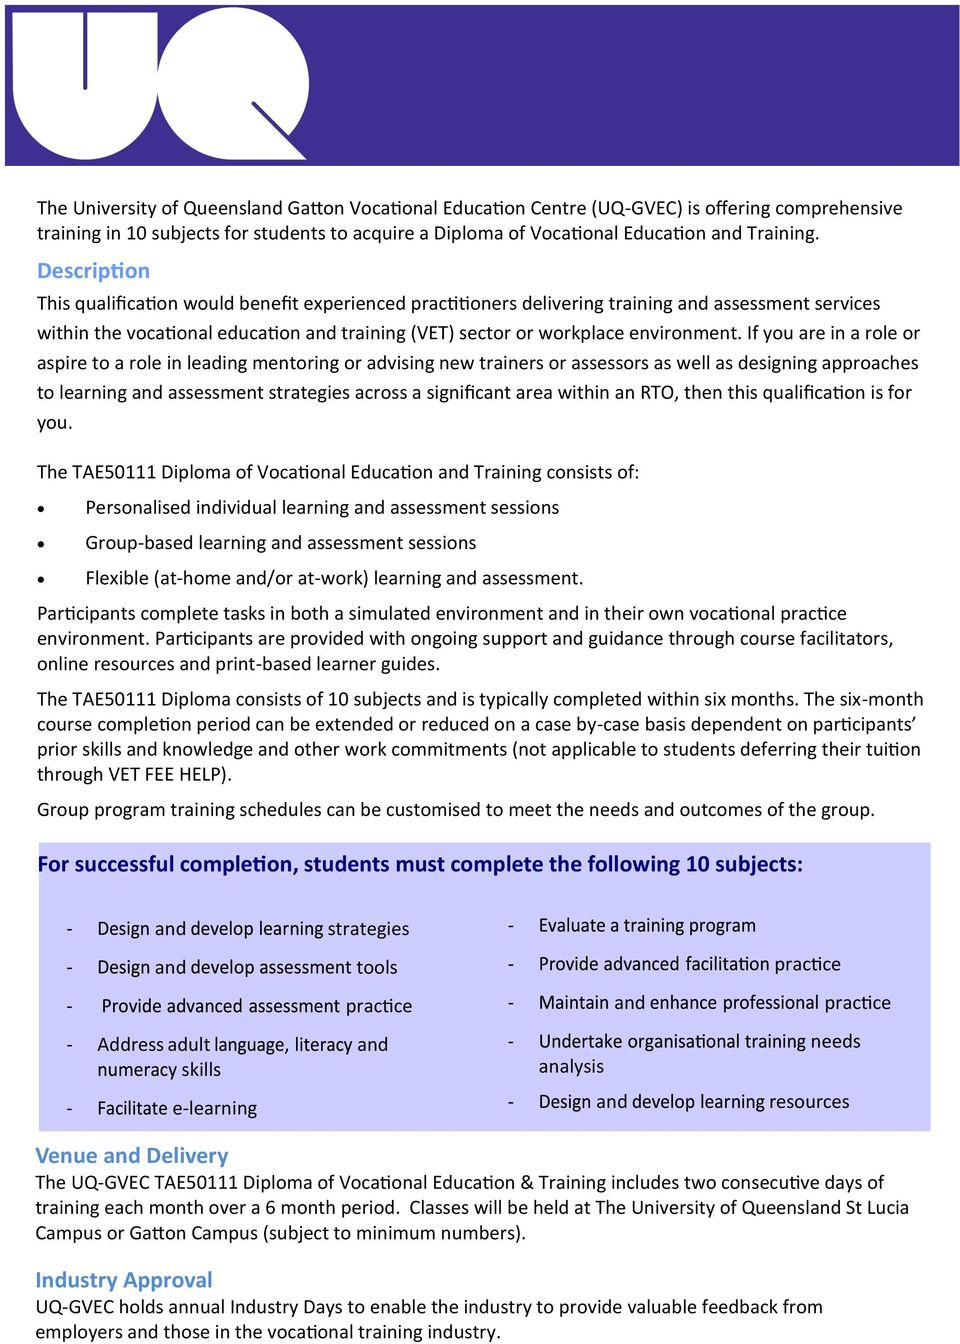 If you are in a role or aspire to a role in leading mentoring or advising new trainers or assessors as well as designing approaches to learning assessment strategies across a significant area within